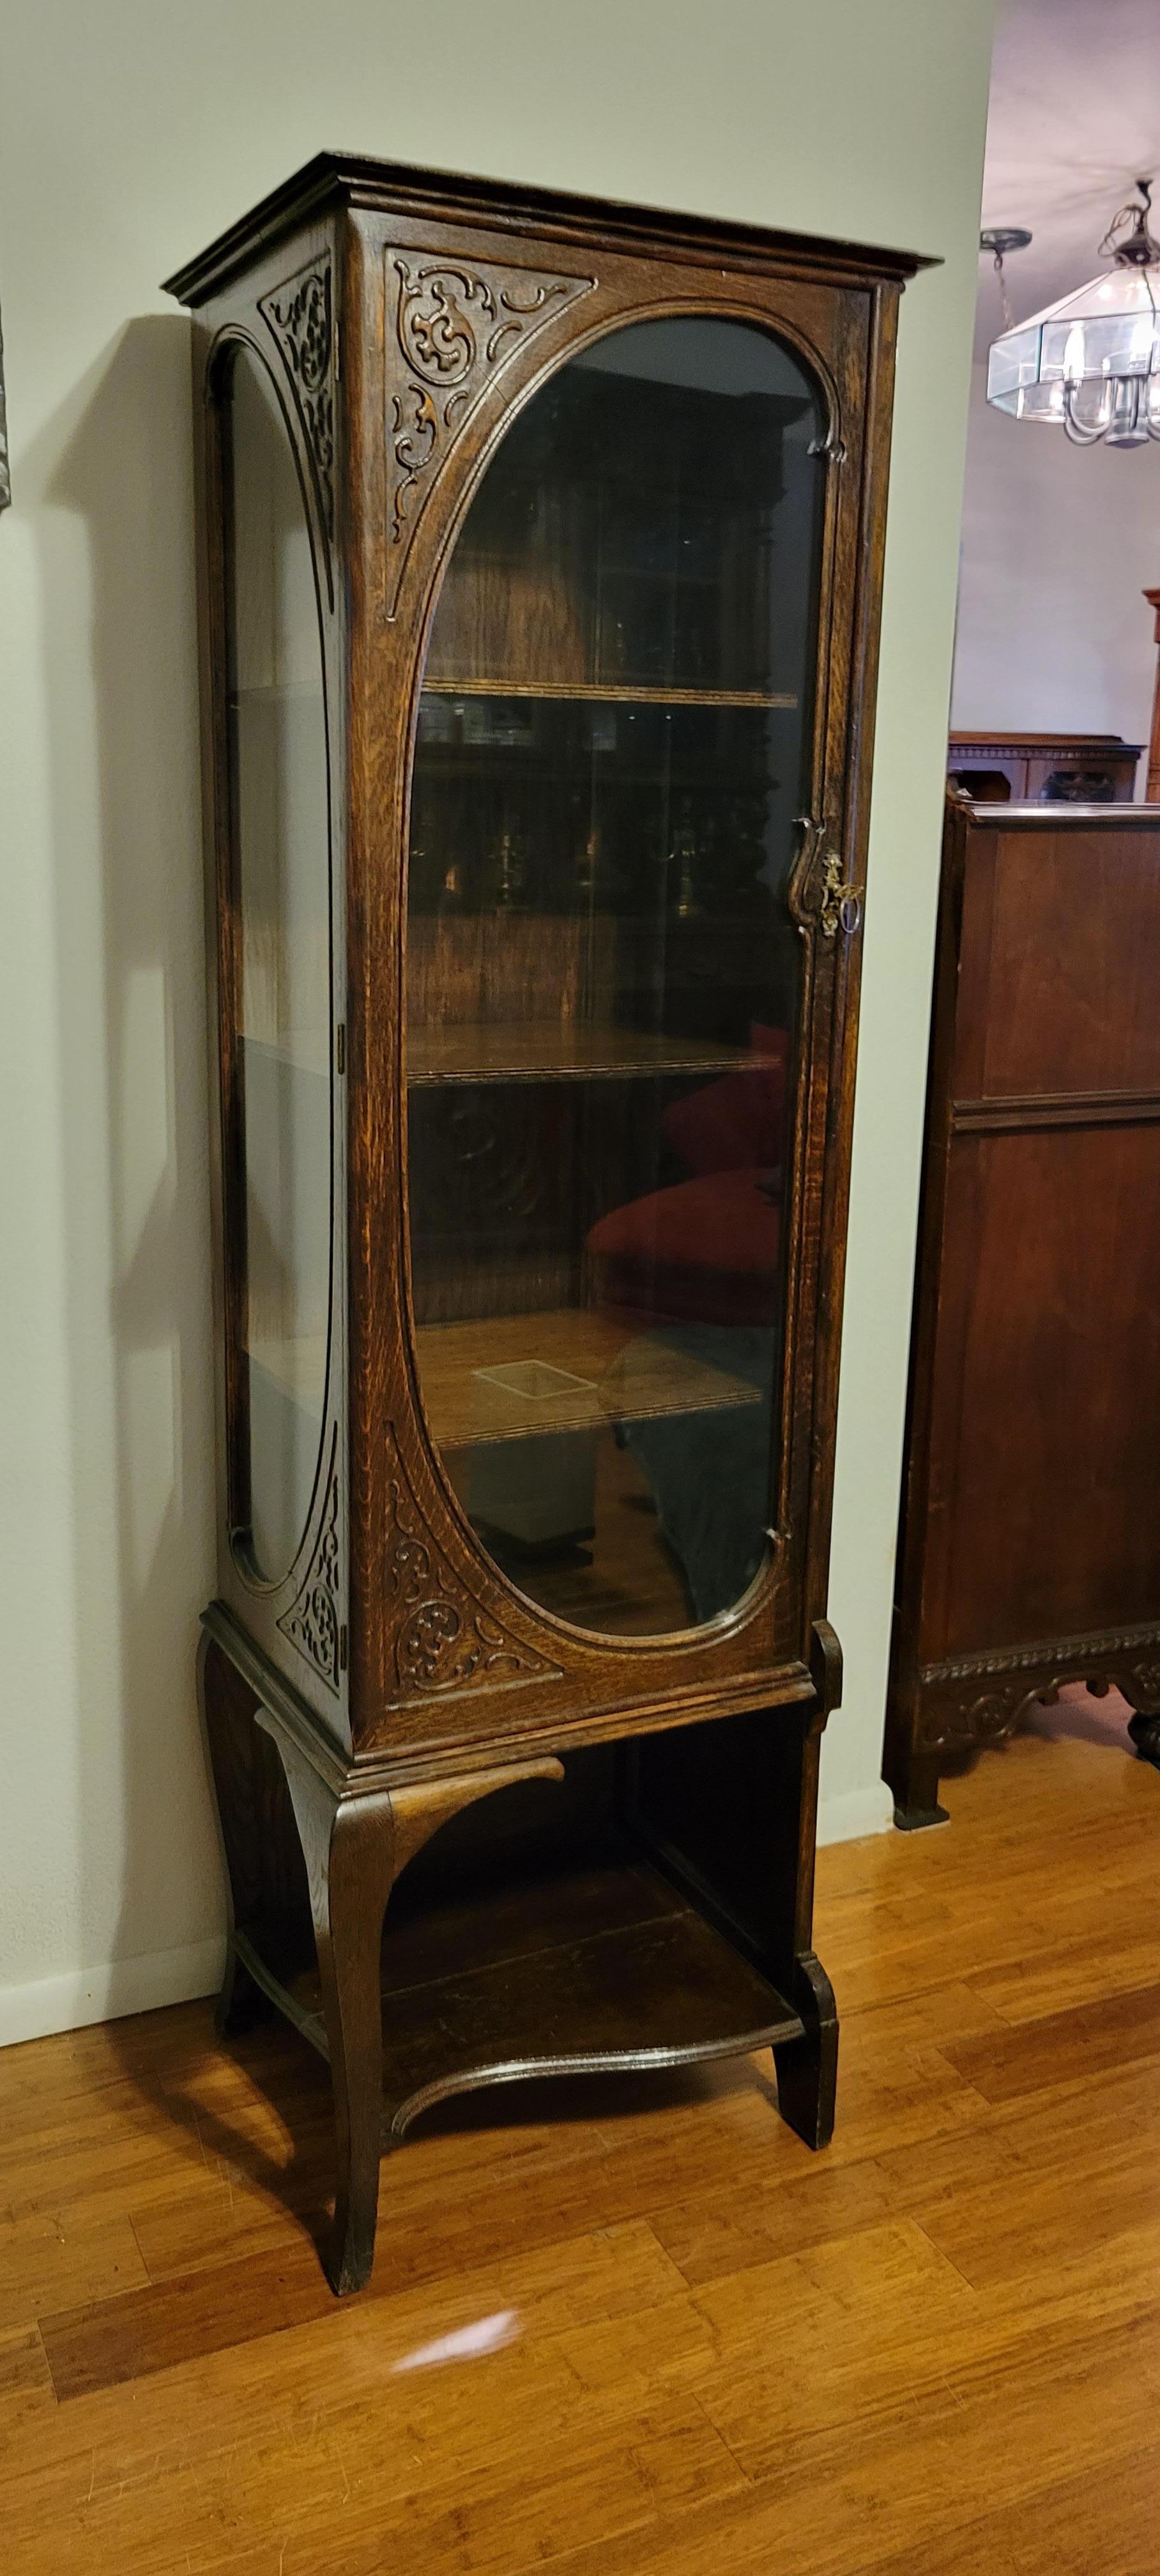 This beautiful Art Nouveau corner Curio was built between 1890 and 1920. It has three shelves and glass in the fron and on the left side. 
The hight of the curio is approximately 66 1/2 inches; it's 18 1/2 inches wide and 15 inches deep. 
The curio